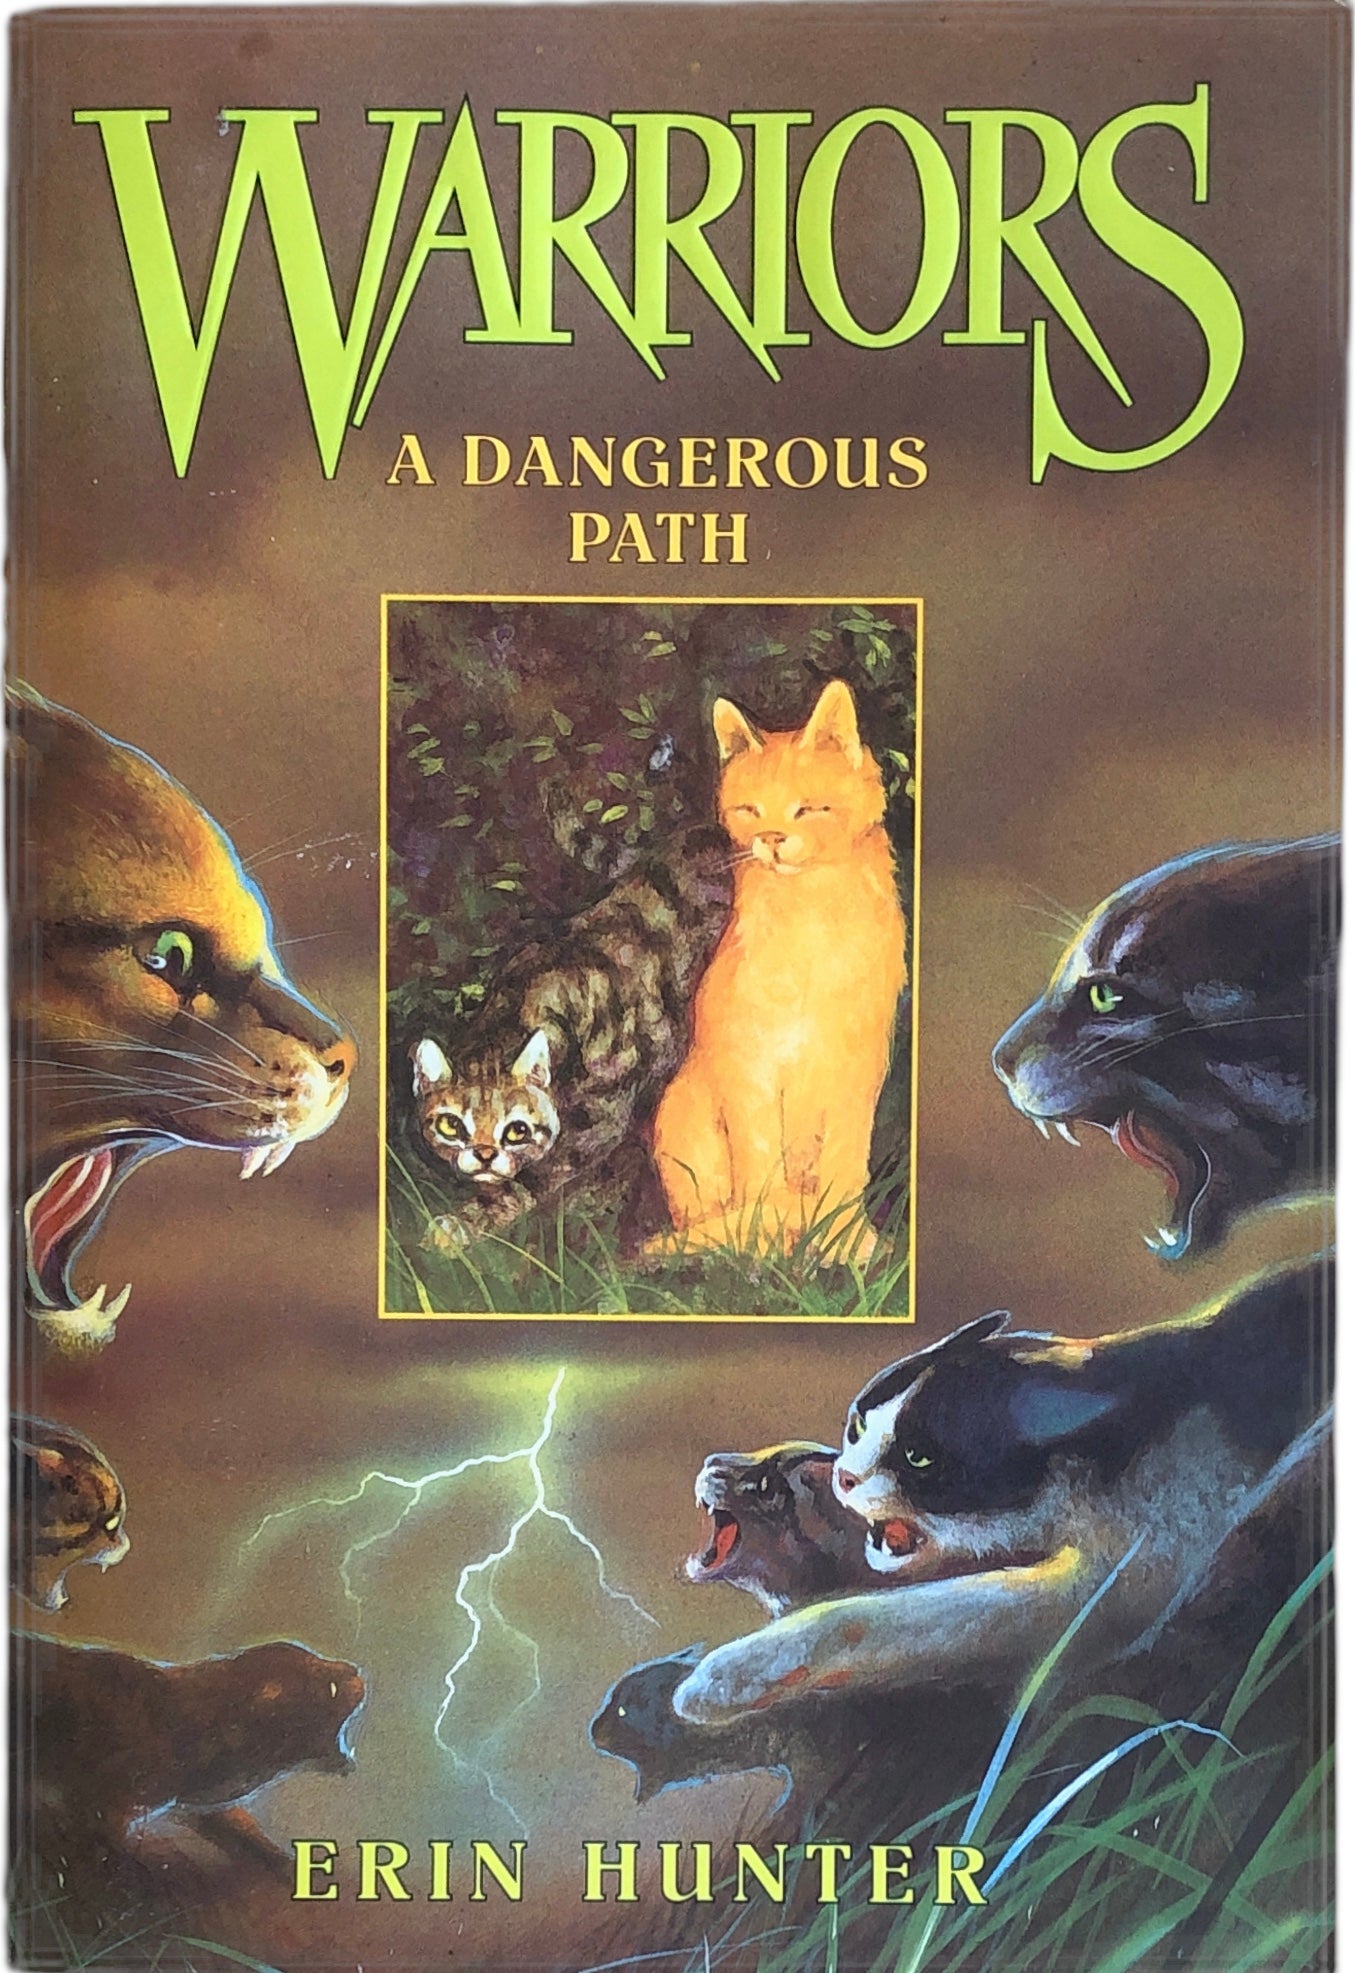 Warrior Cats Series 1: The Prophecies Begin - 6 Books Collection Set By  Erin Hunter